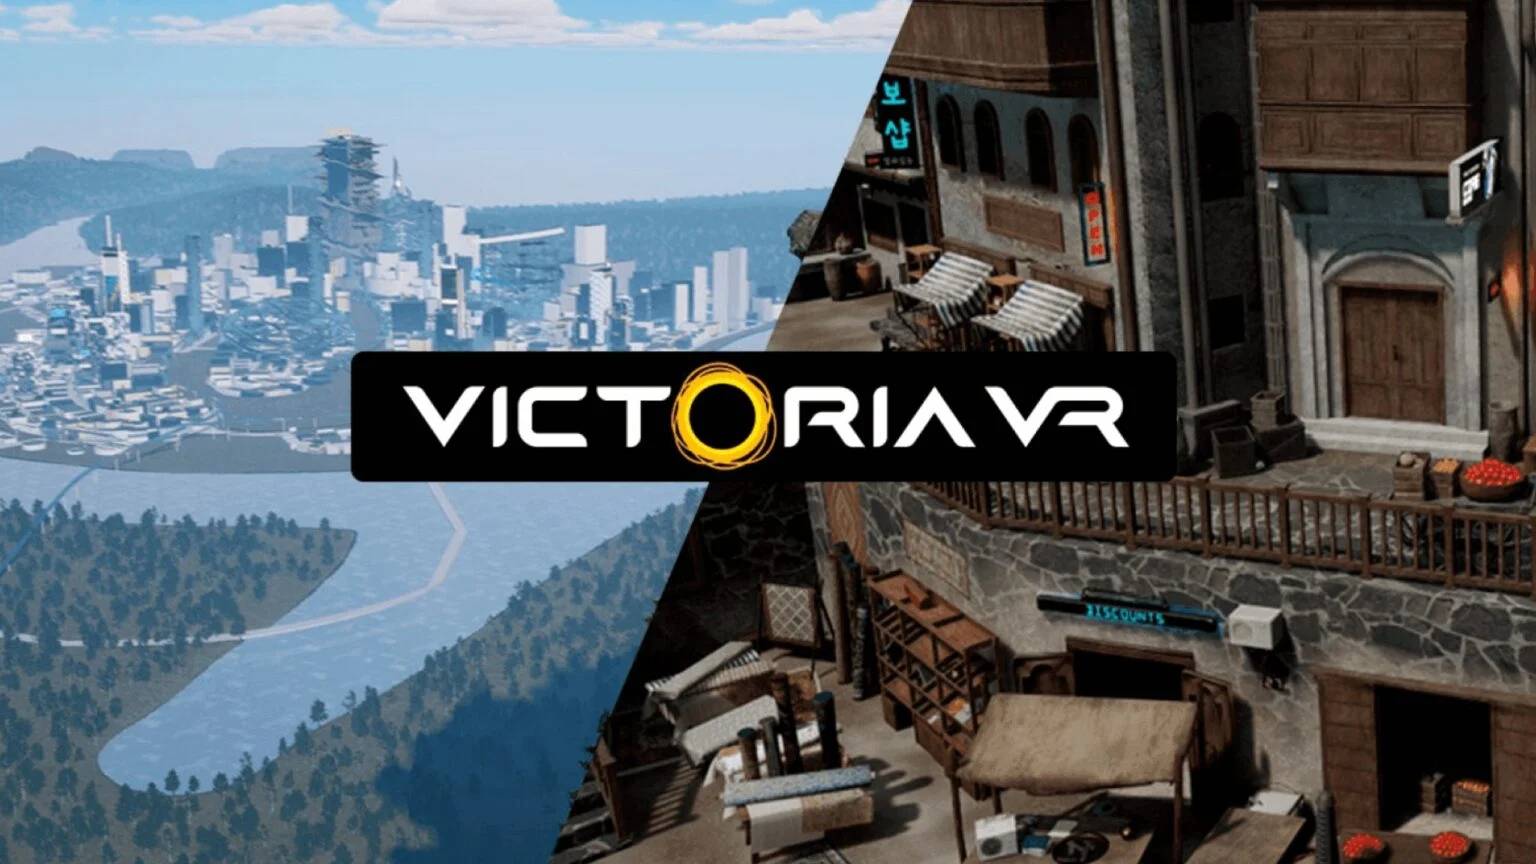 Victoria VR, Apple Vision Pro, Pixelmon, Serum City, Bored and Hungry